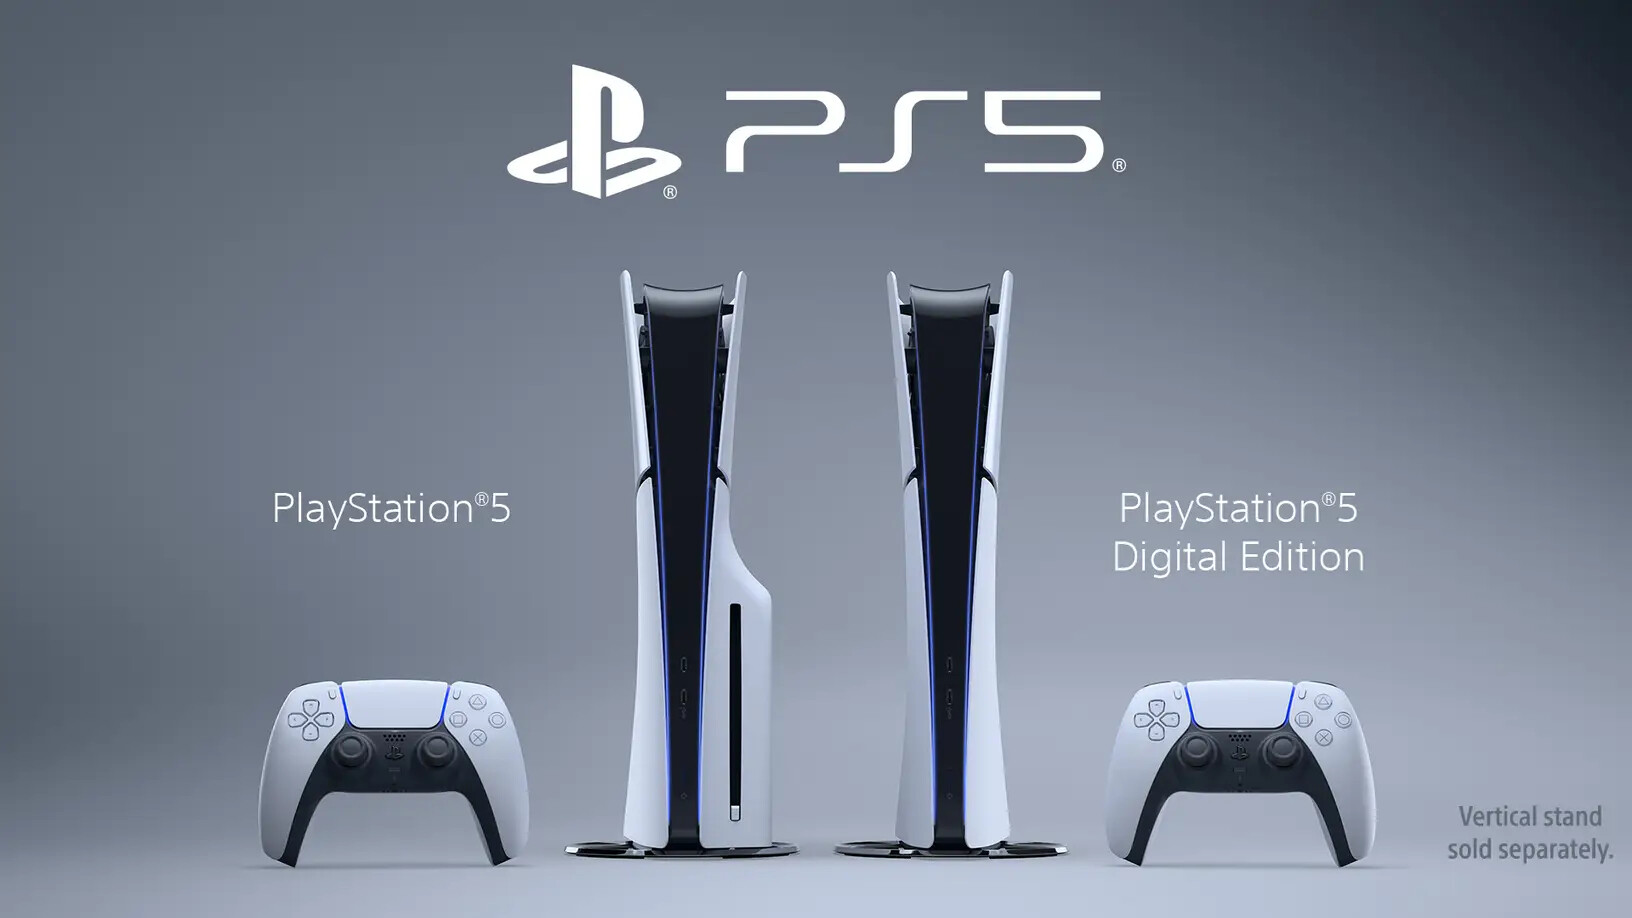 Sony Announces Refreshed, Slimmer PlayStation Consoles for the